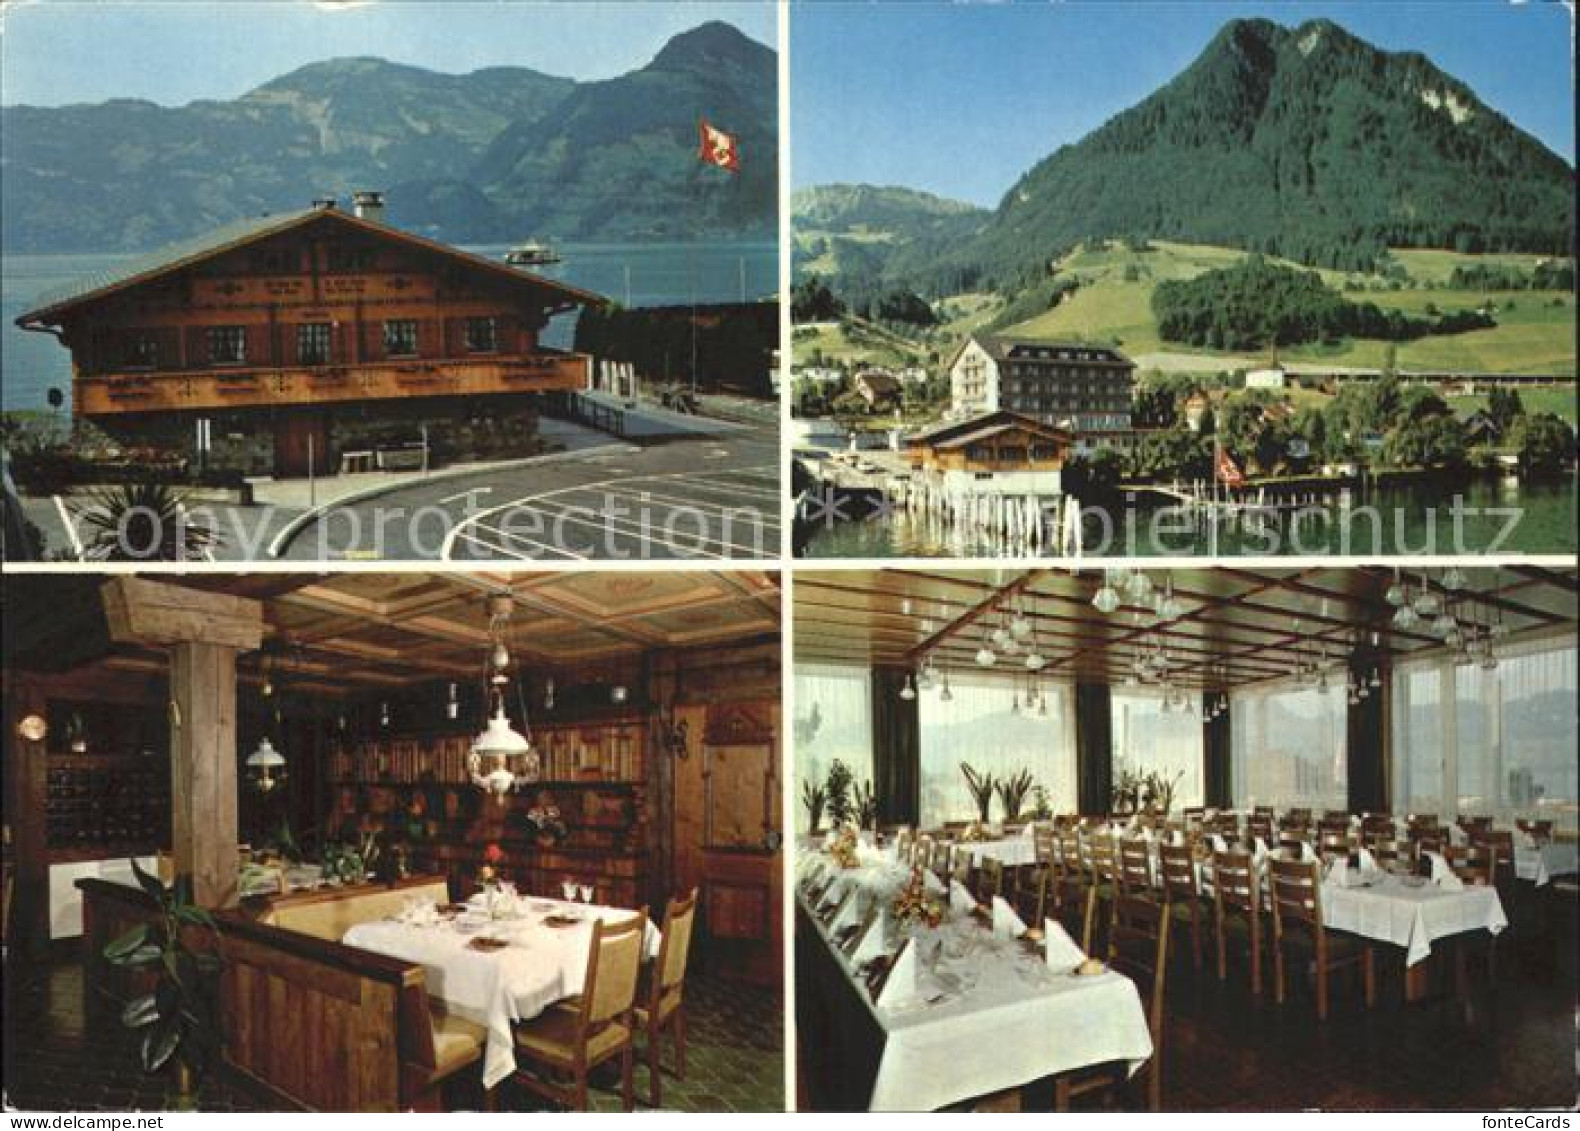 12375902 Beckenried Sternen Hotel Gaststube Speisesaal Beckenried - Other & Unclassified